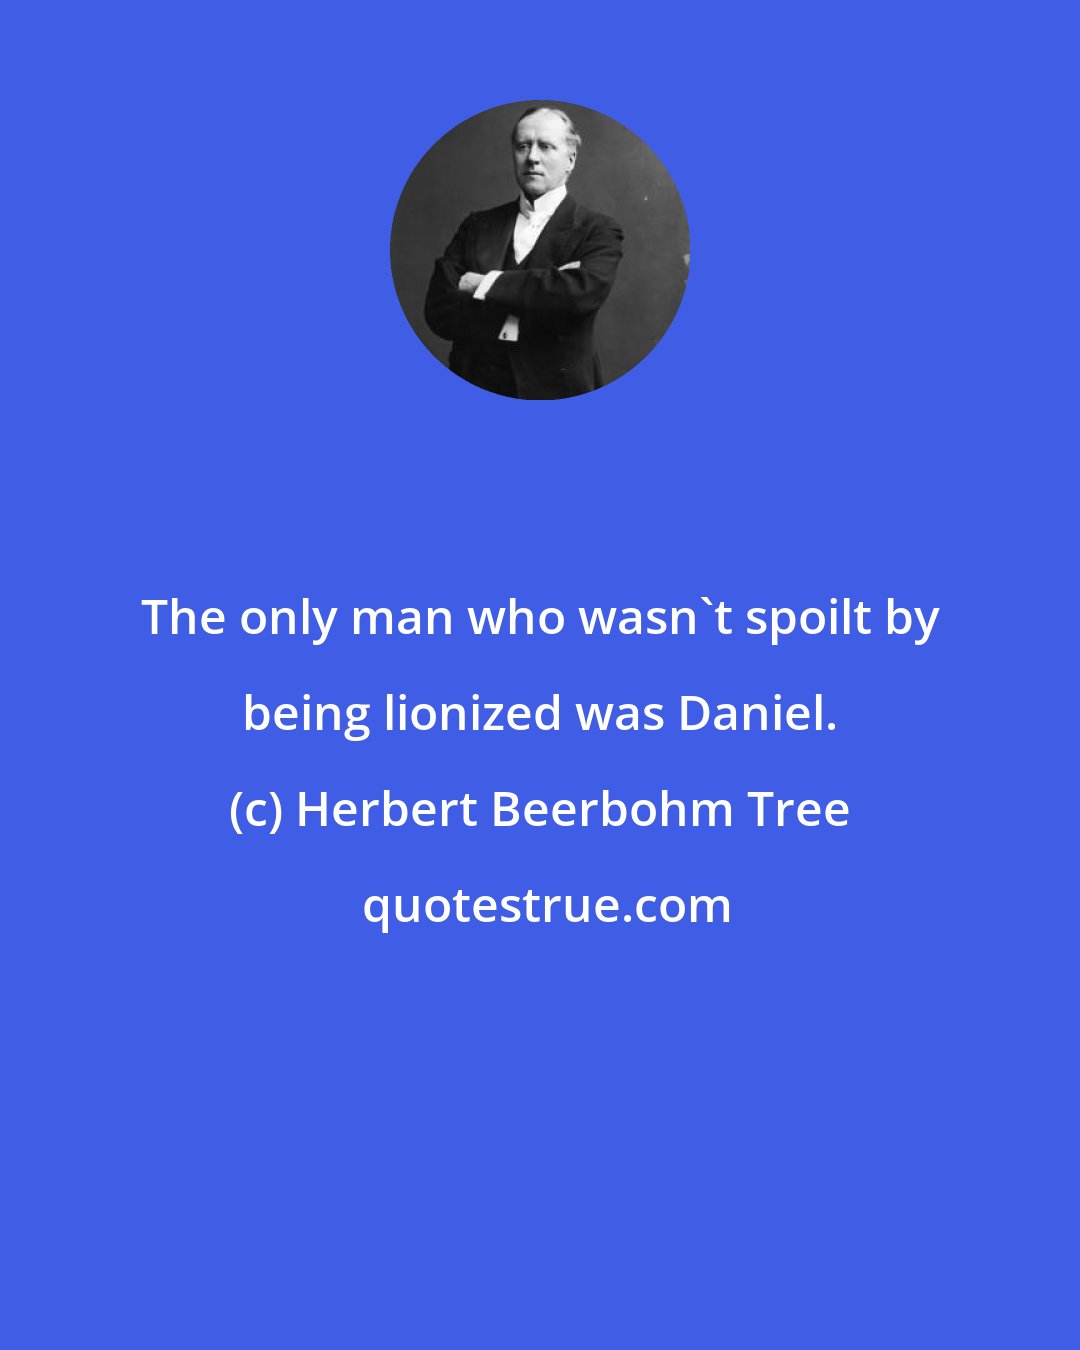 Herbert Beerbohm Tree: The only man who wasn't spoilt by being lionized was Daniel.